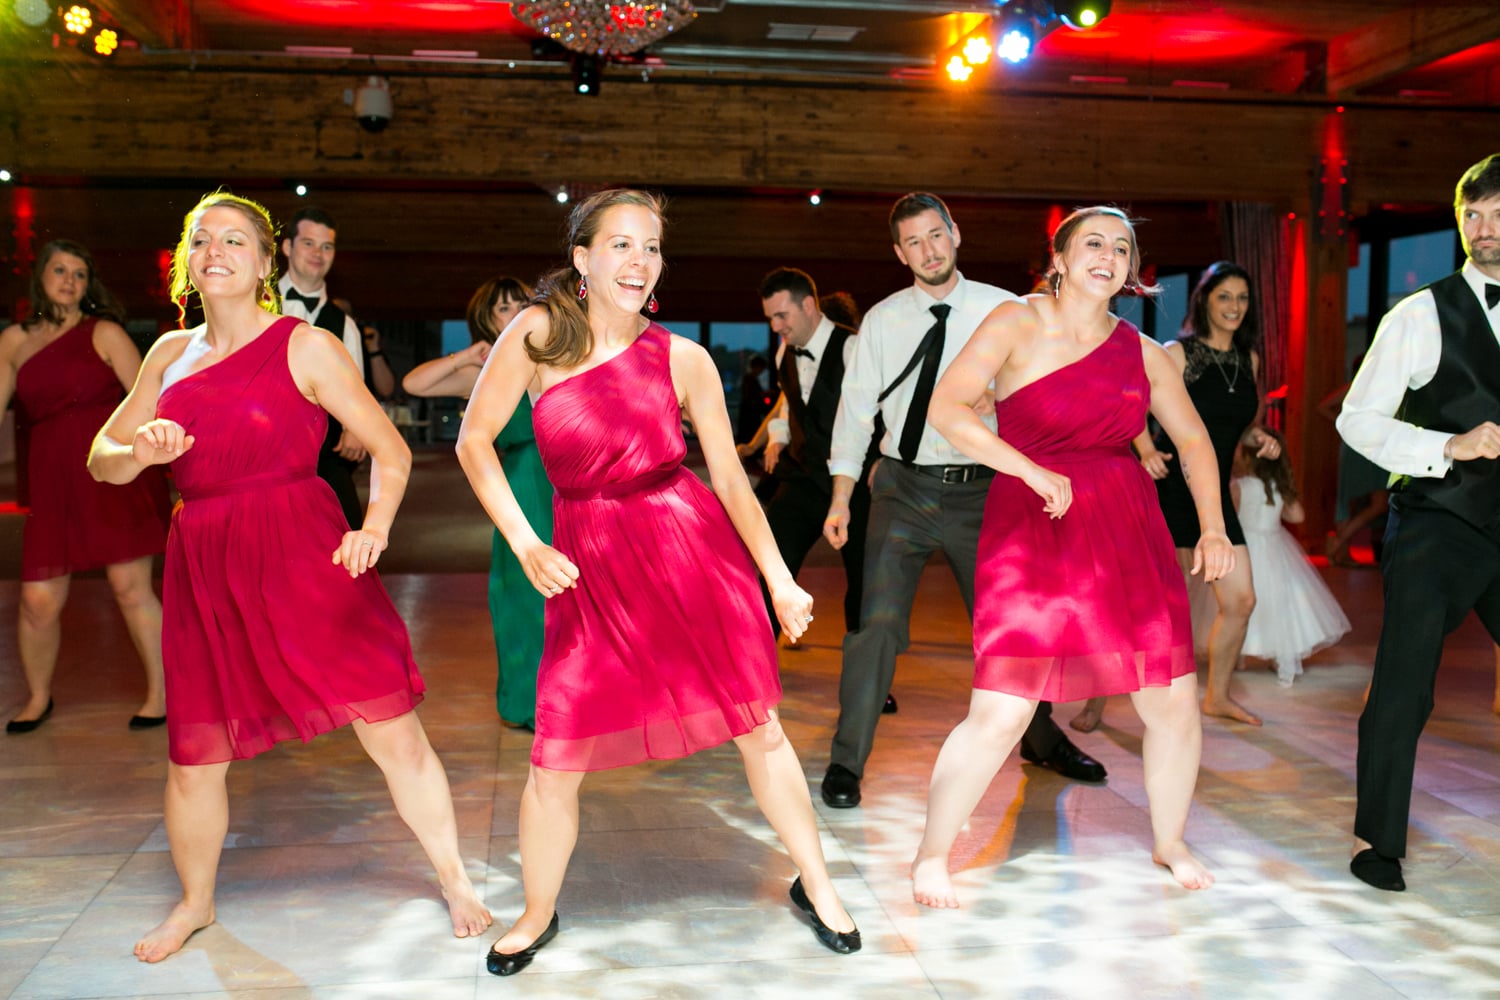 Three bridesmaids in red dresses dance during a reception.